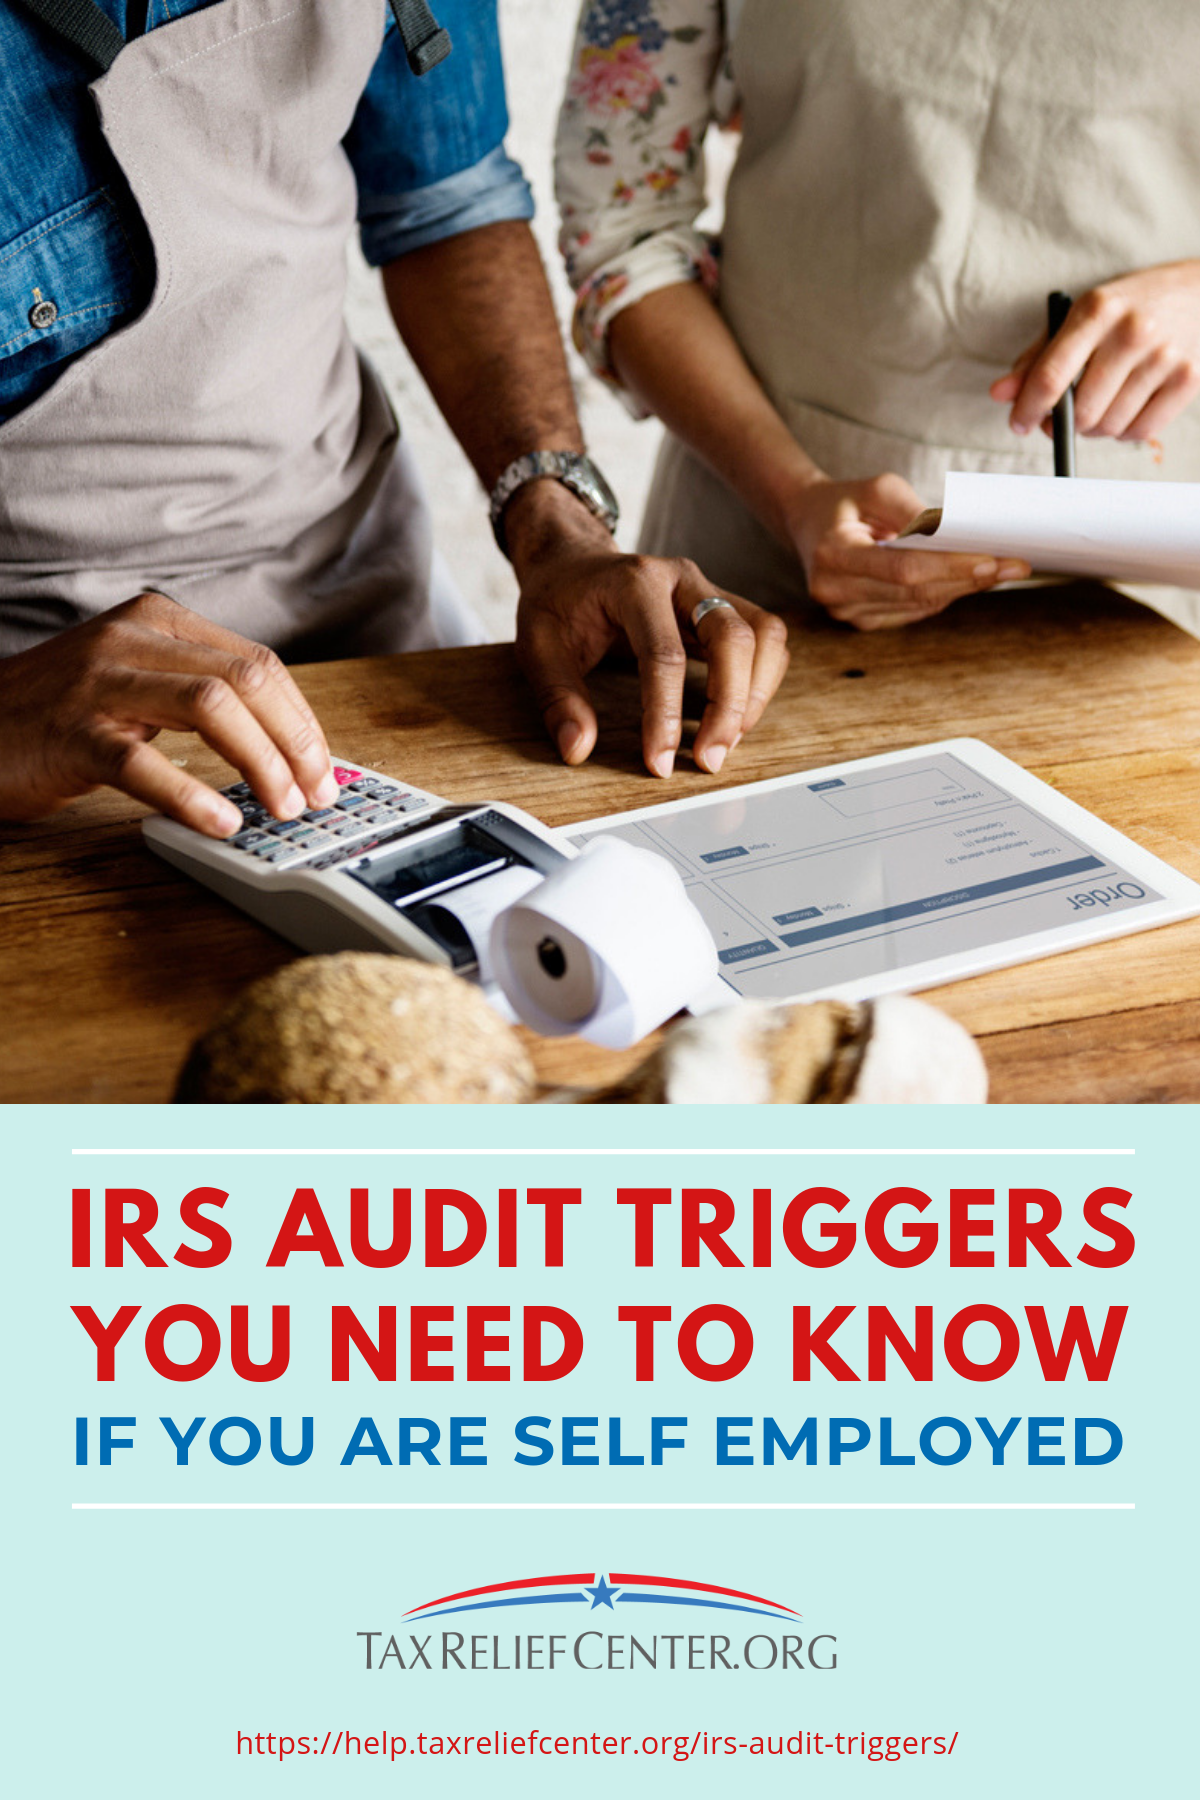 IRS Audit Triggers You Need To Know If You Are Self Employed https://help.taxreliefcenter.org/irs-audit-triggers/